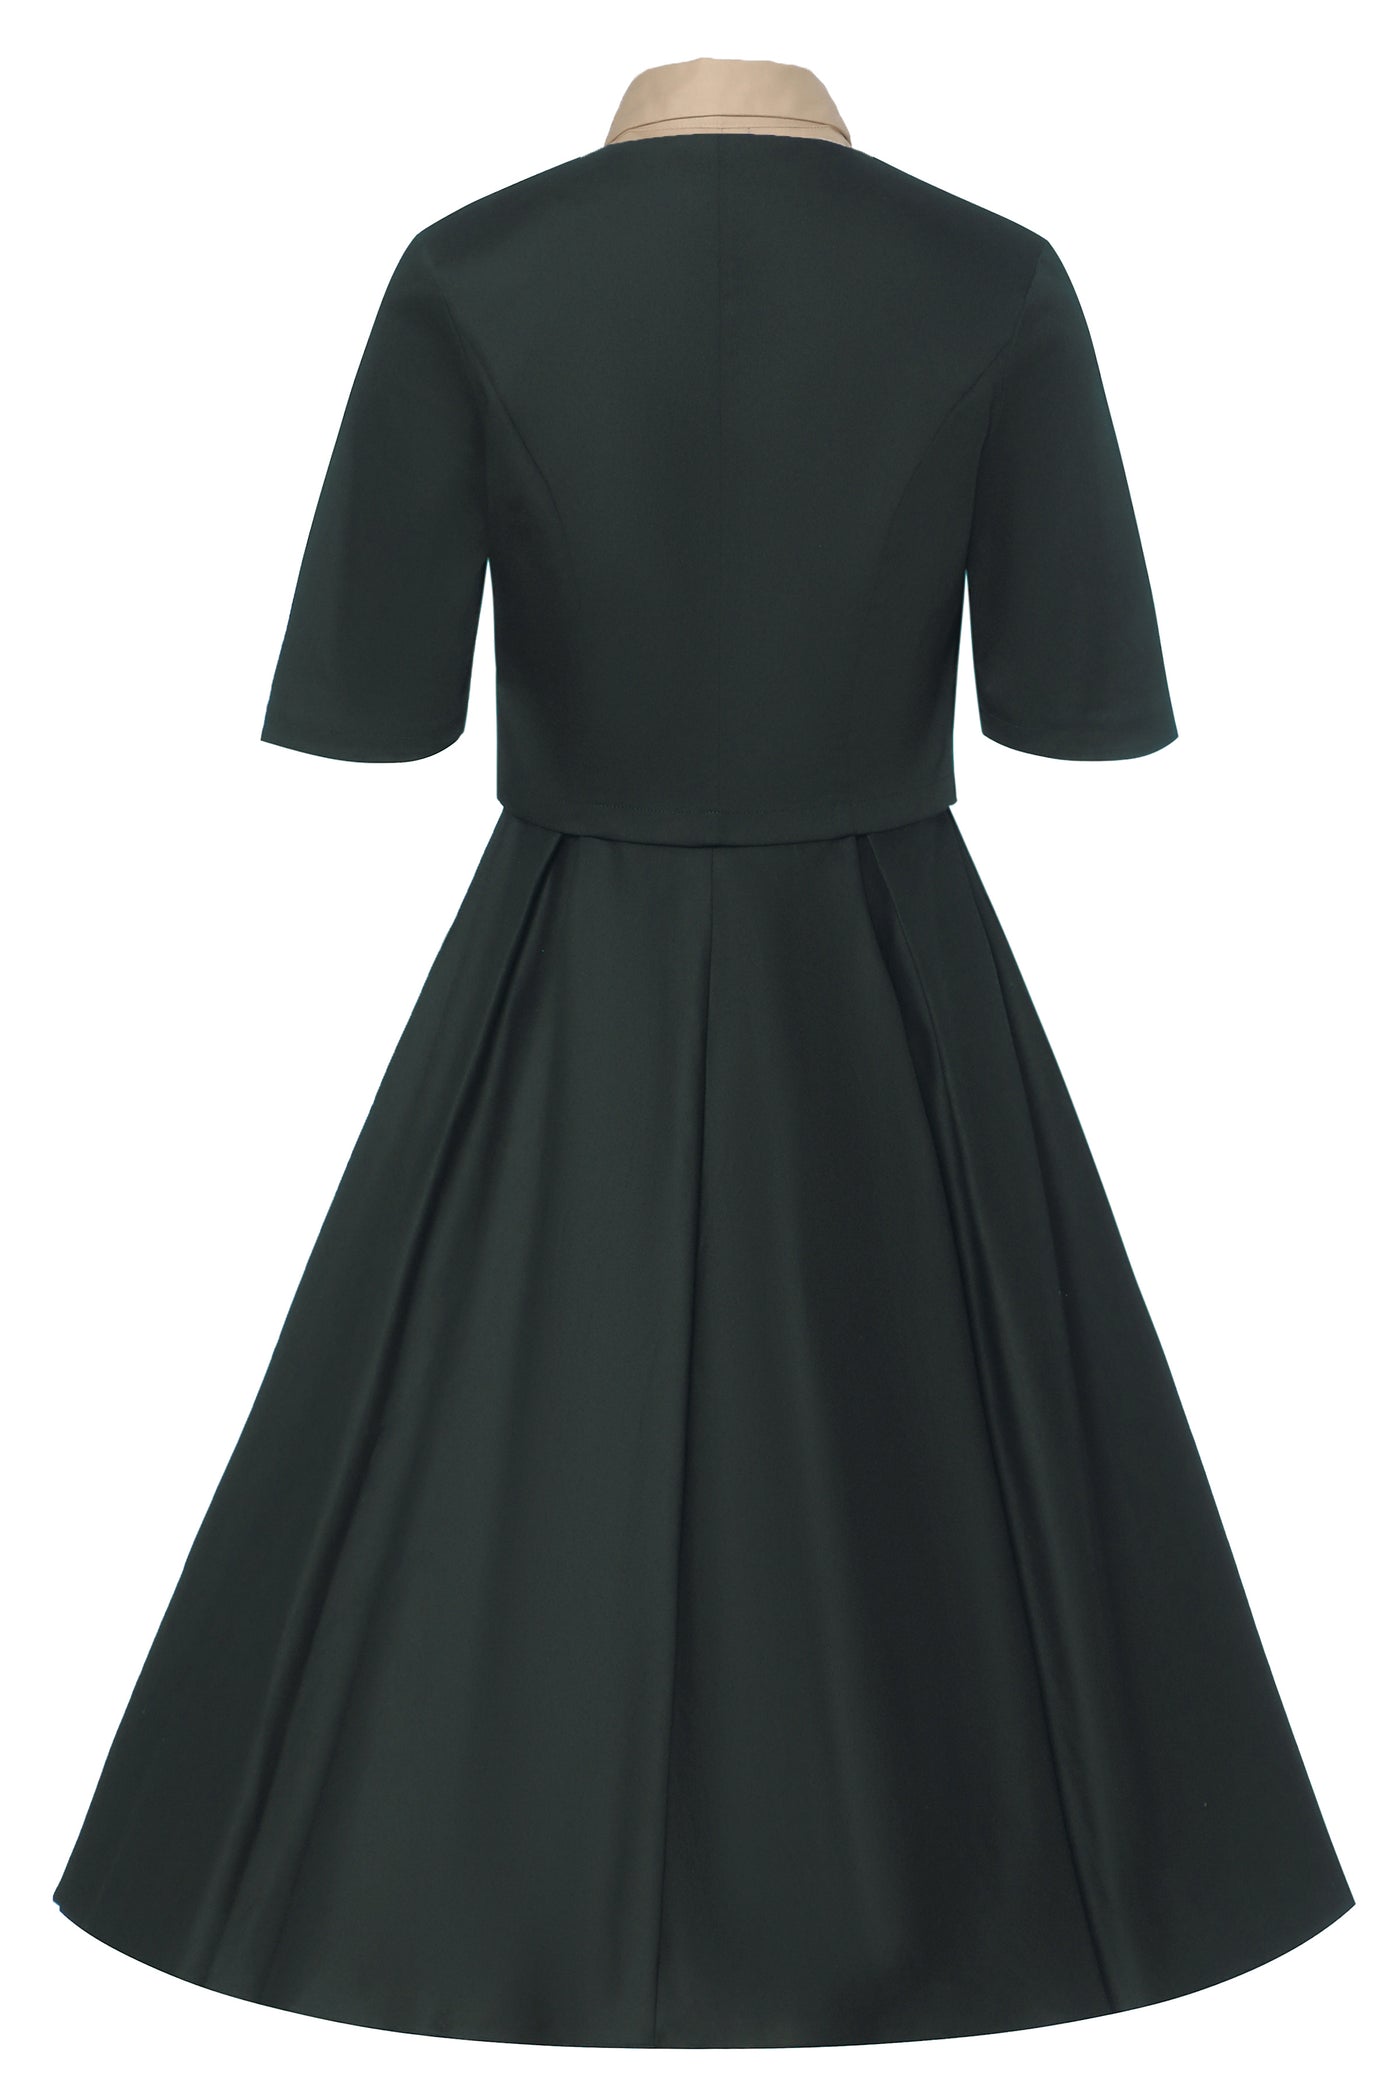 Back view of Dark Green Bolero Jacket with our Lisa Dress